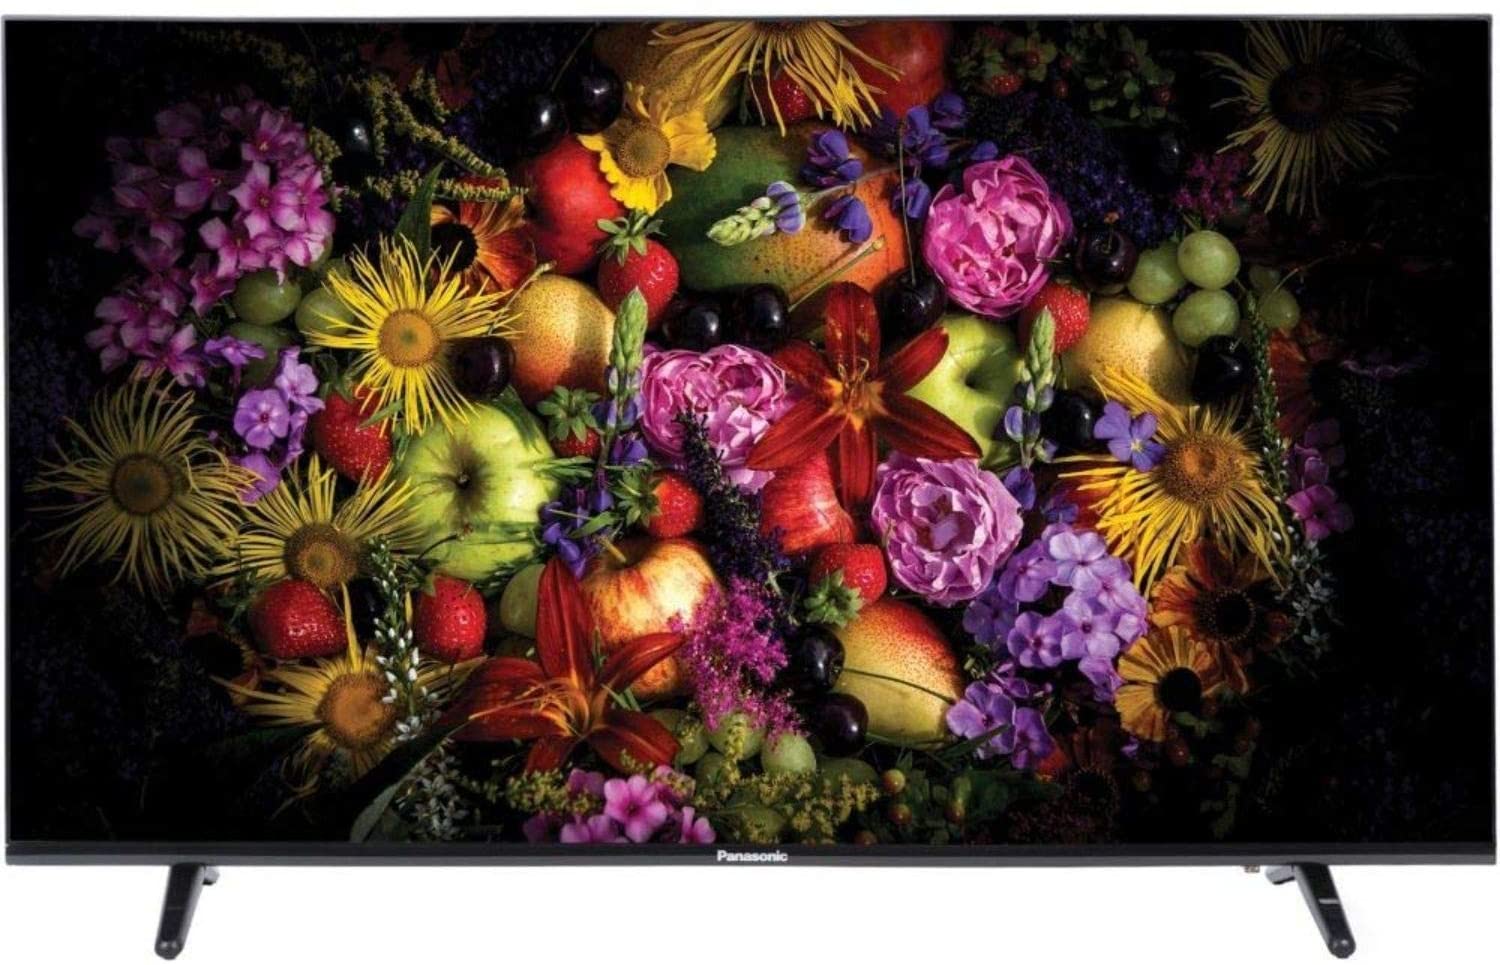 Panasonic 139 cm (55 Inches) 4K Ultra HD Smart Android LED TV TH-55HX635DX